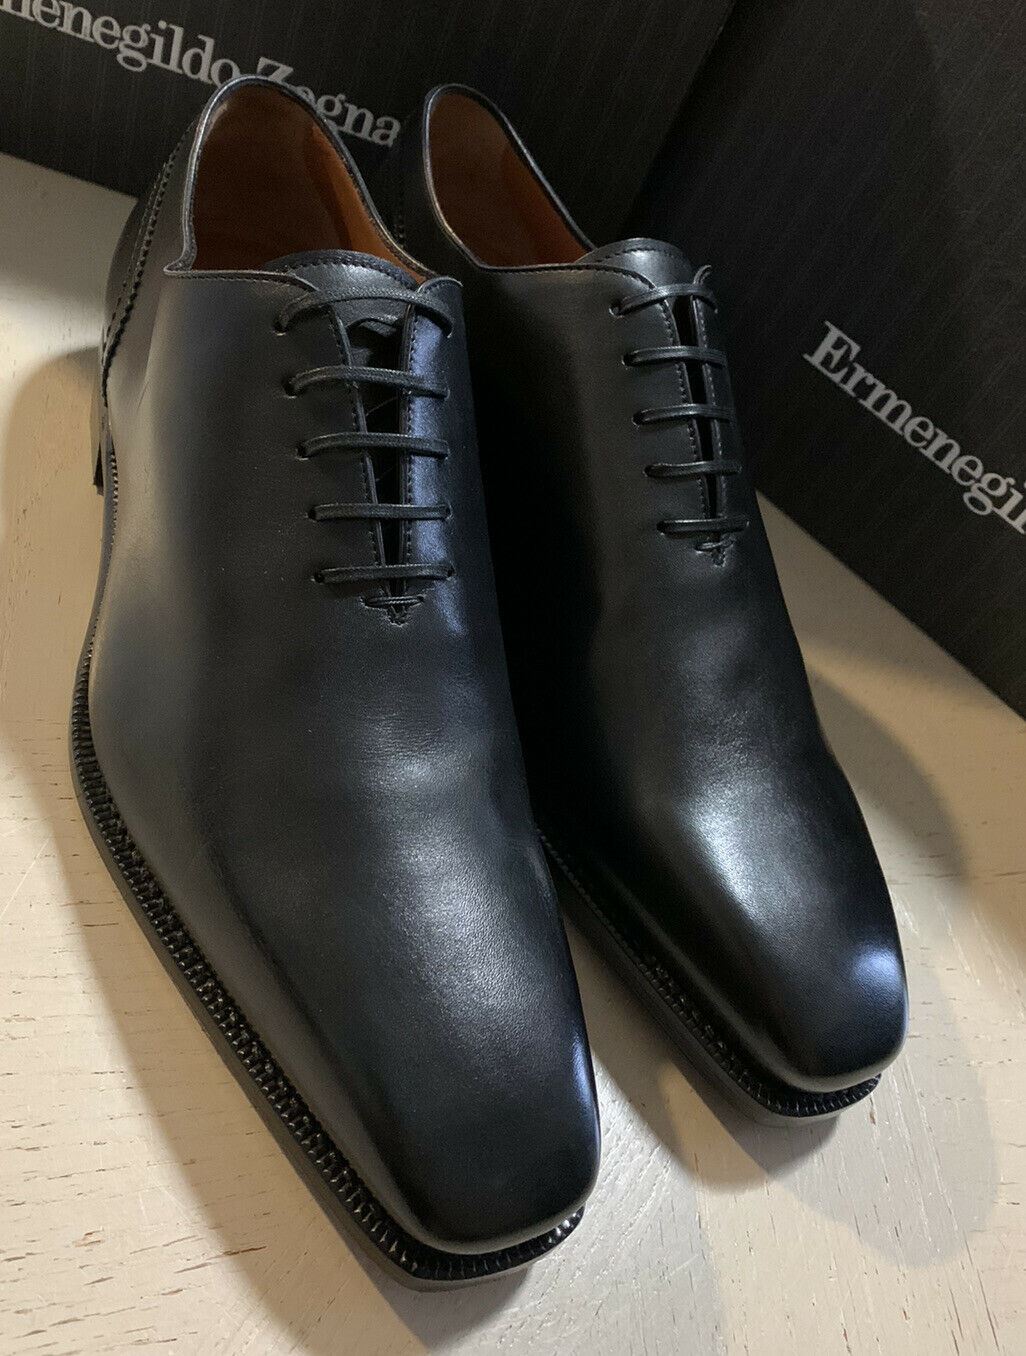 zegna oxford shoes